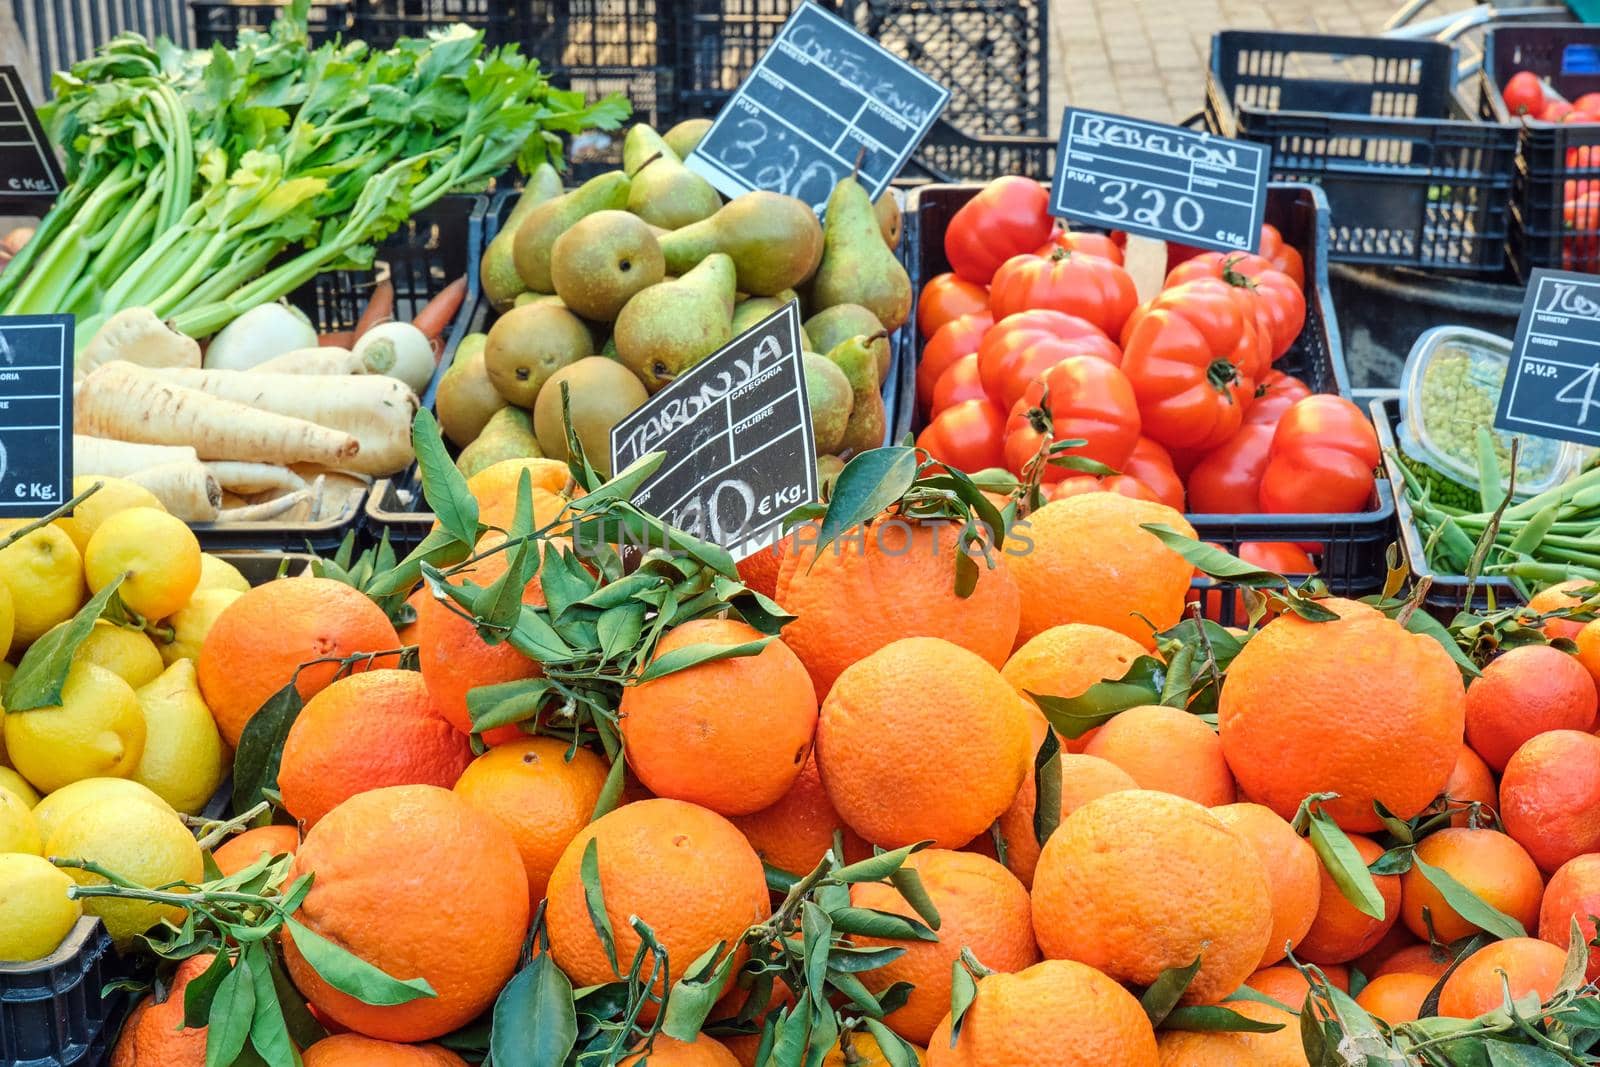 Fruits and vegetables for sale at a market